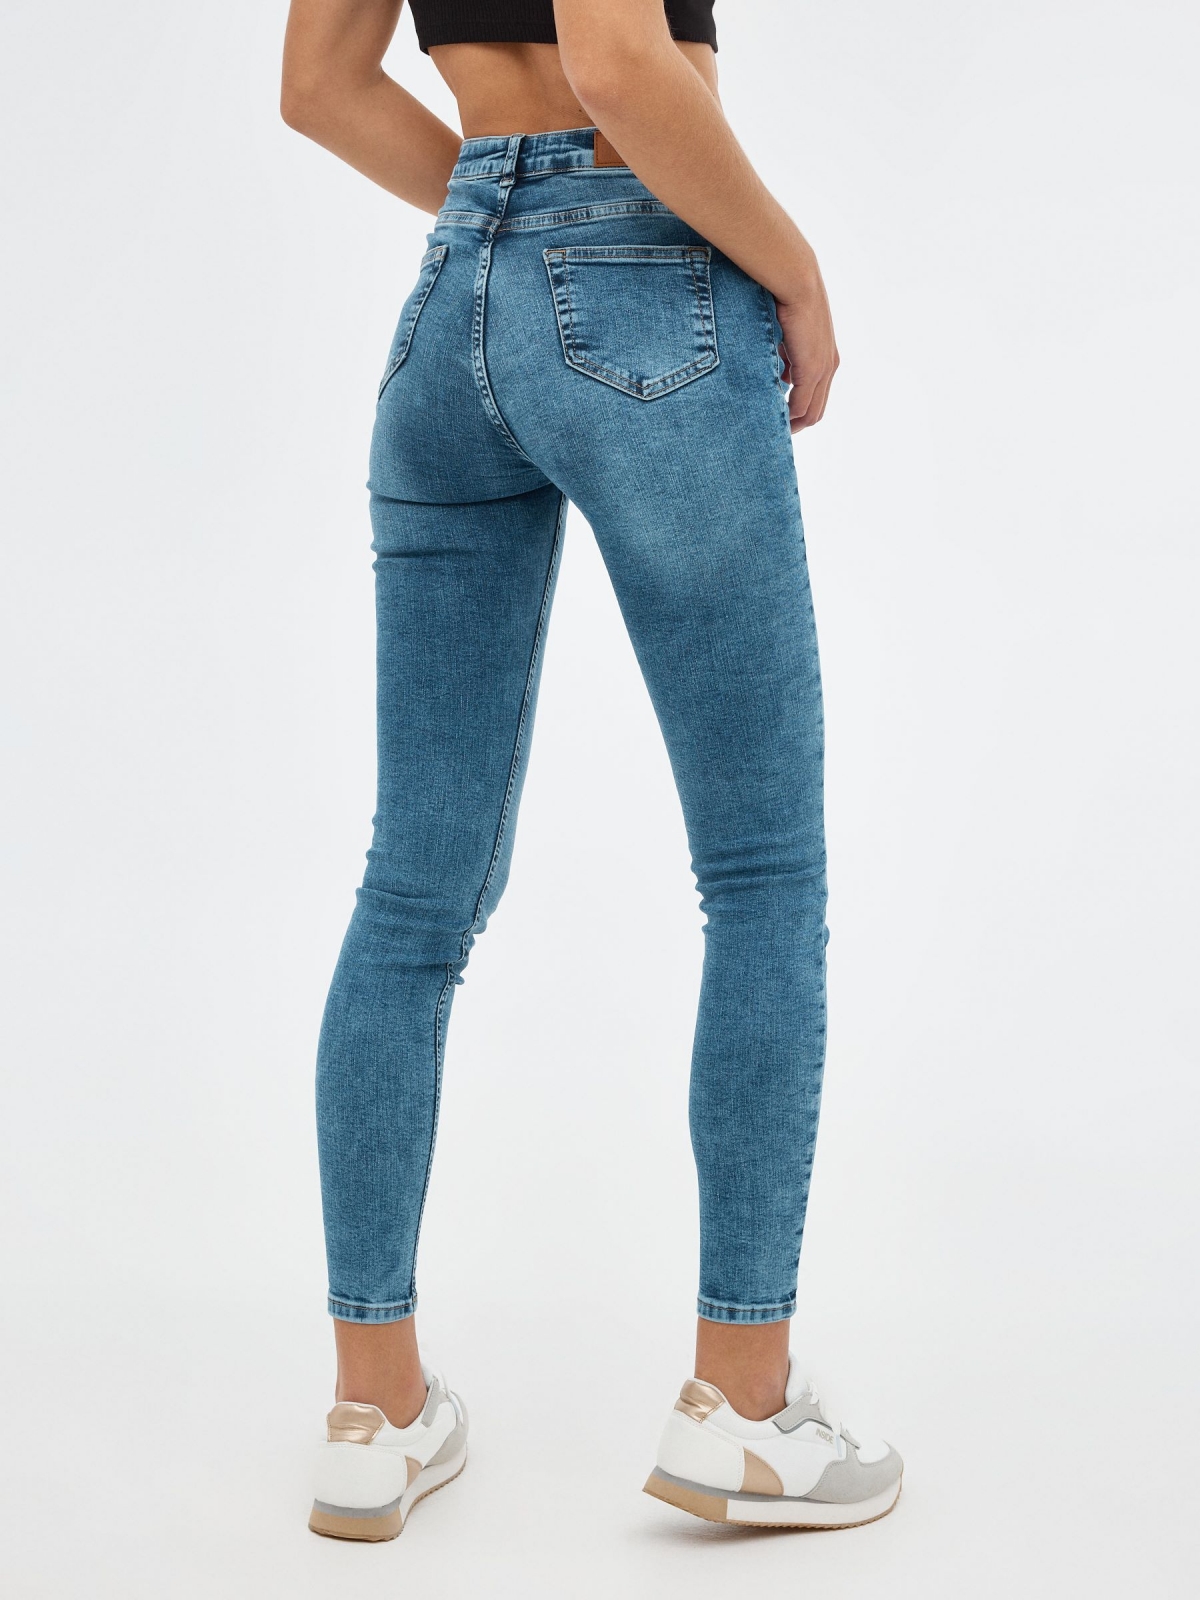 Medium Skinny Jeans blue middle back view